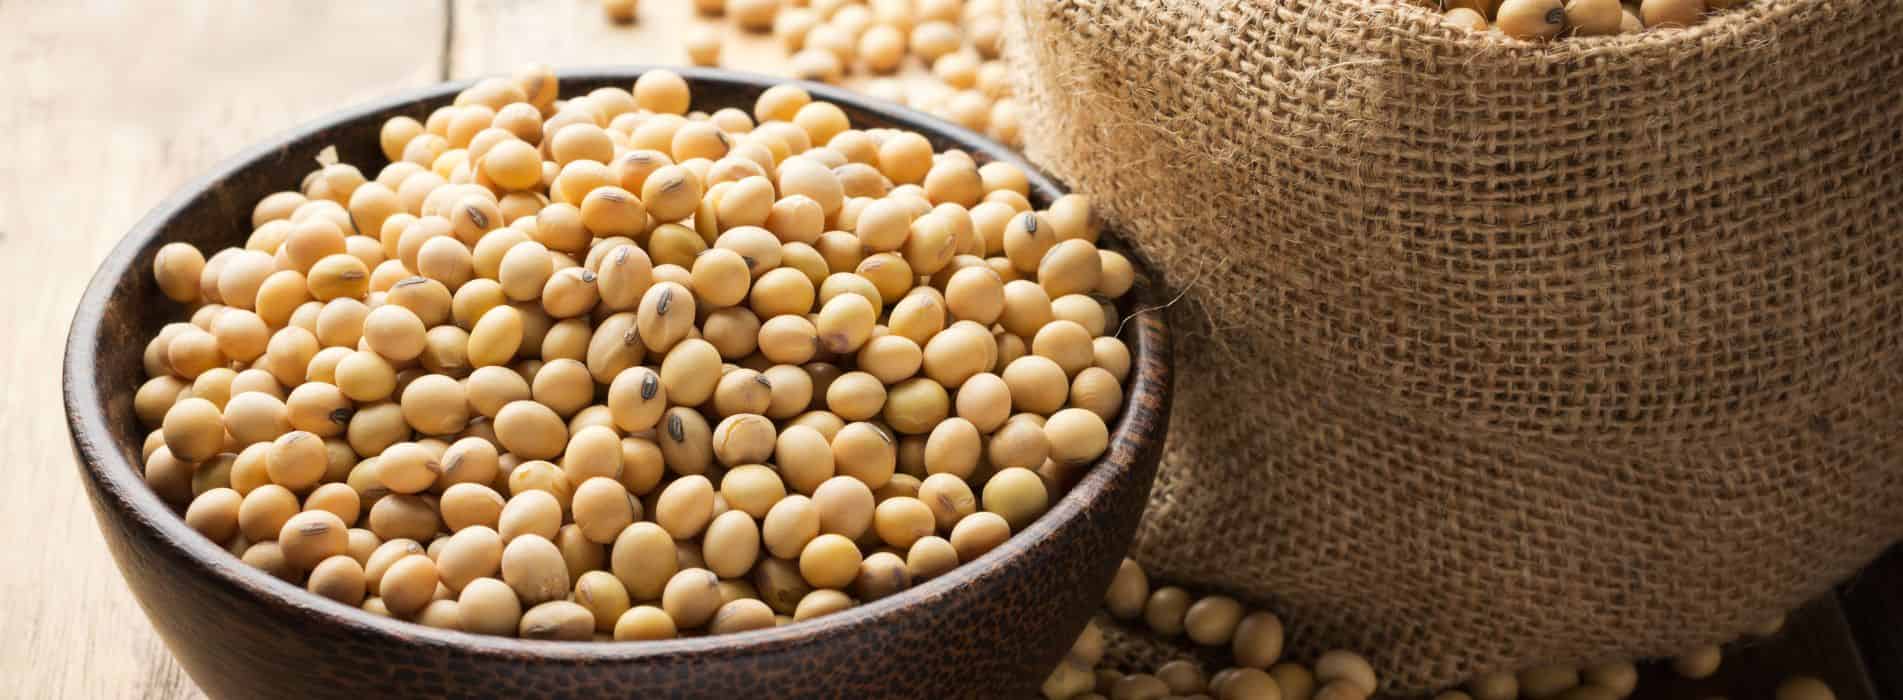 Soy grains for health